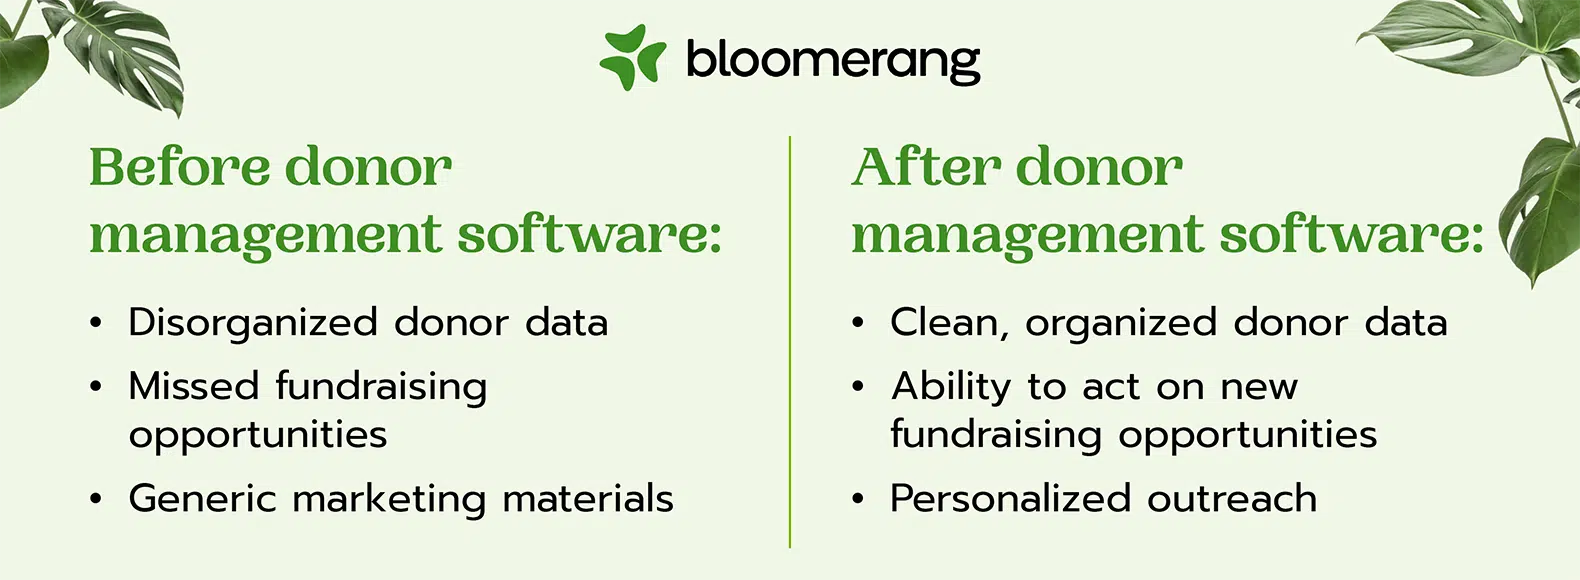 This image shows the benefits of donor management software, outlined in the list below. 